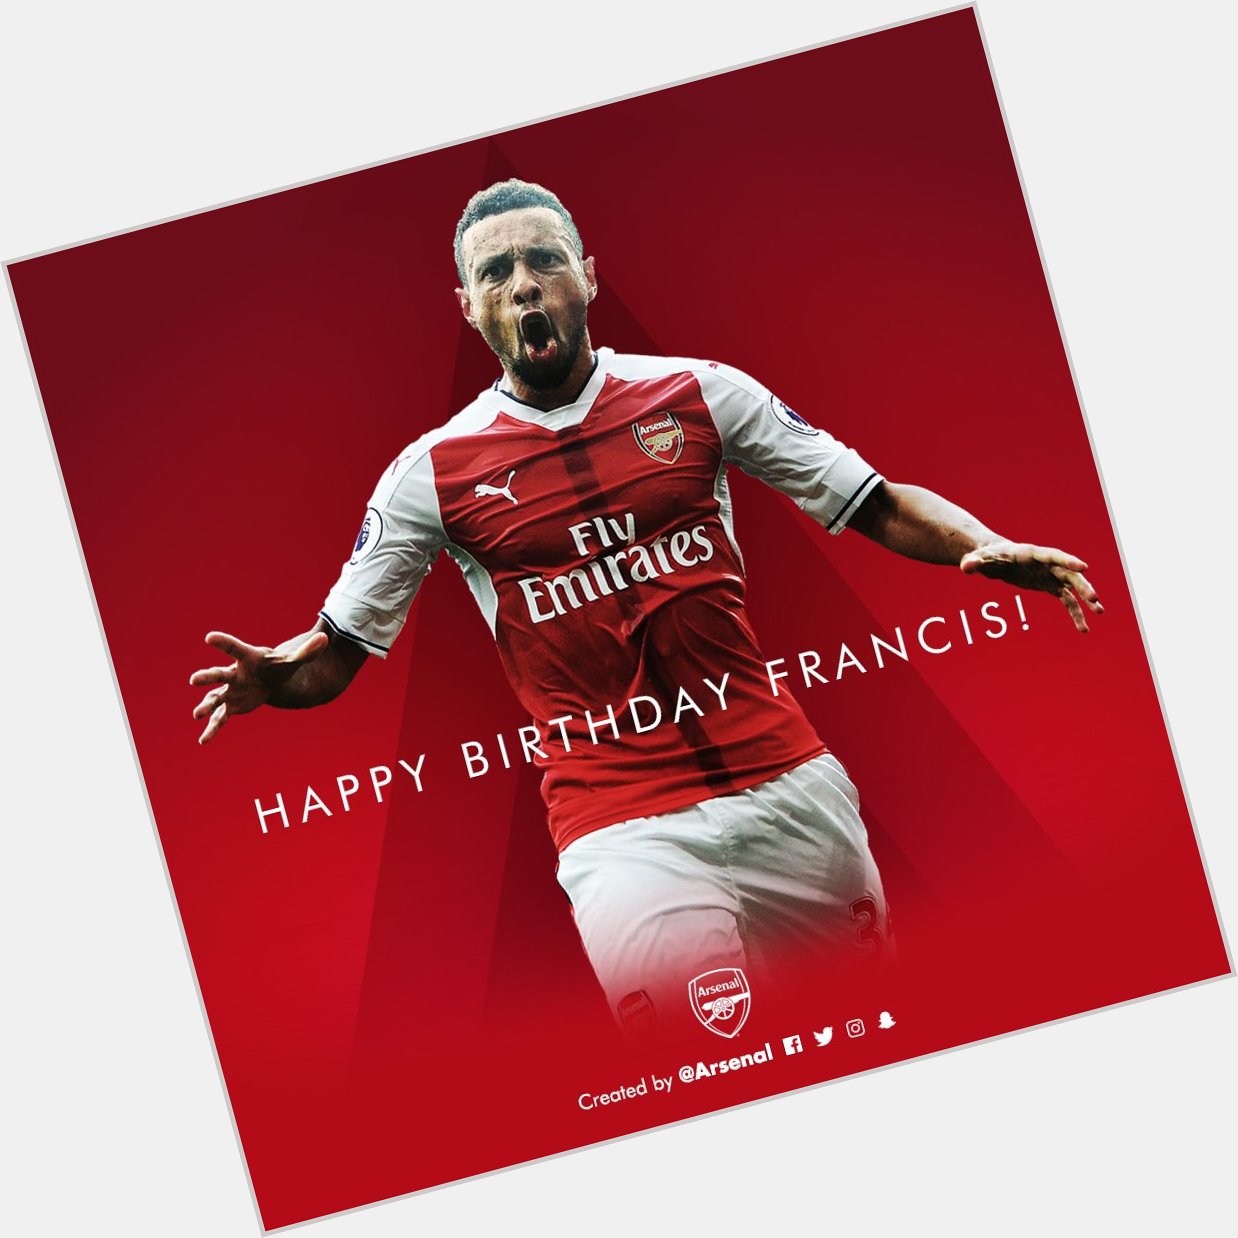 Arsenal Indonesia wish a very Happy Birthday to Francis Coquelin who turns 26 today.  